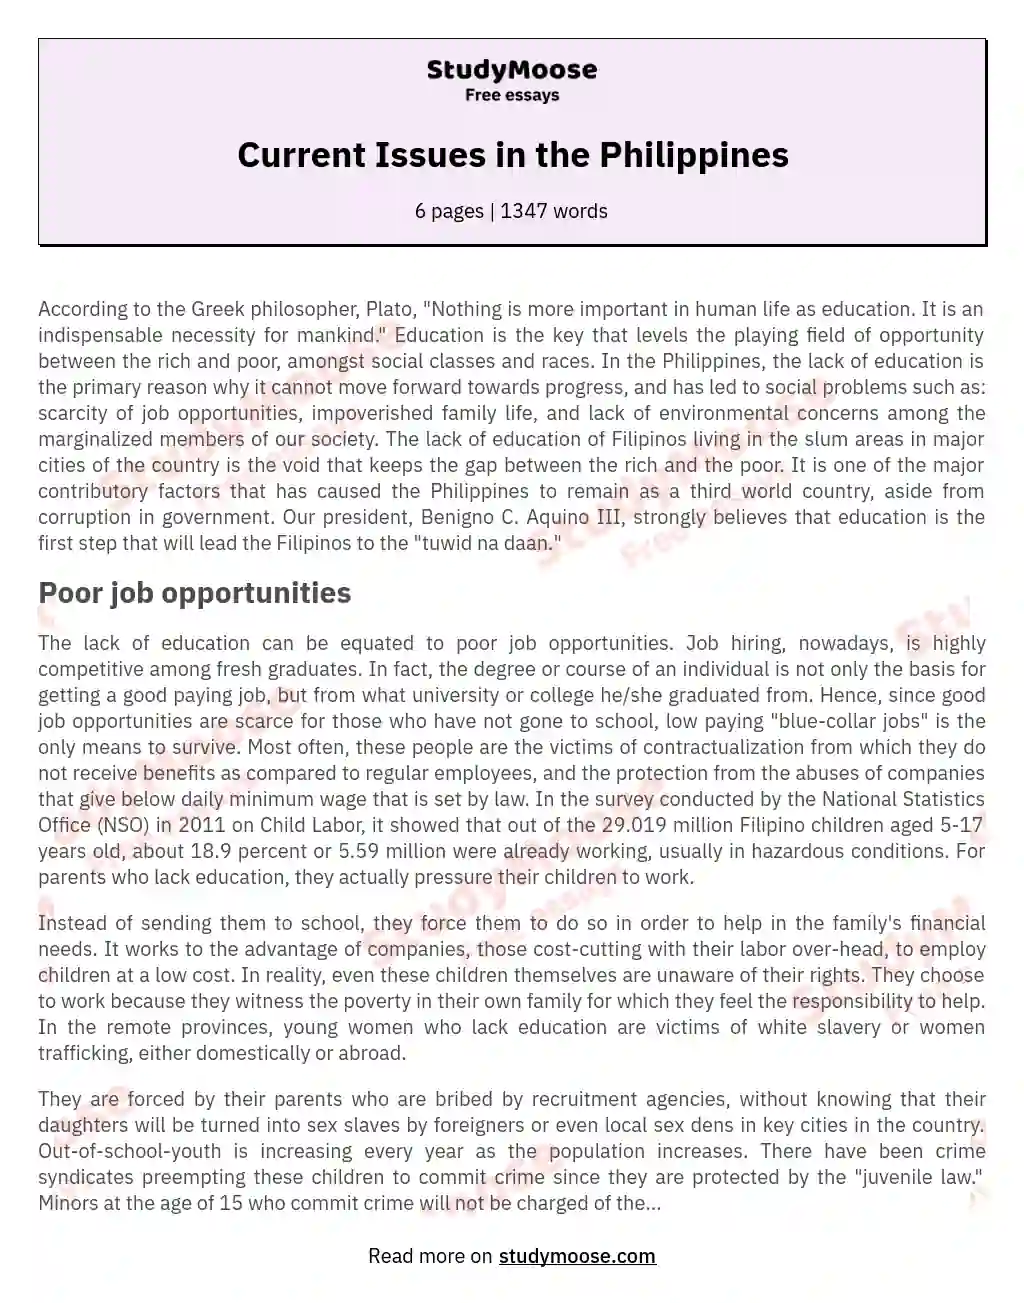 Current Issues in the Philippines essay